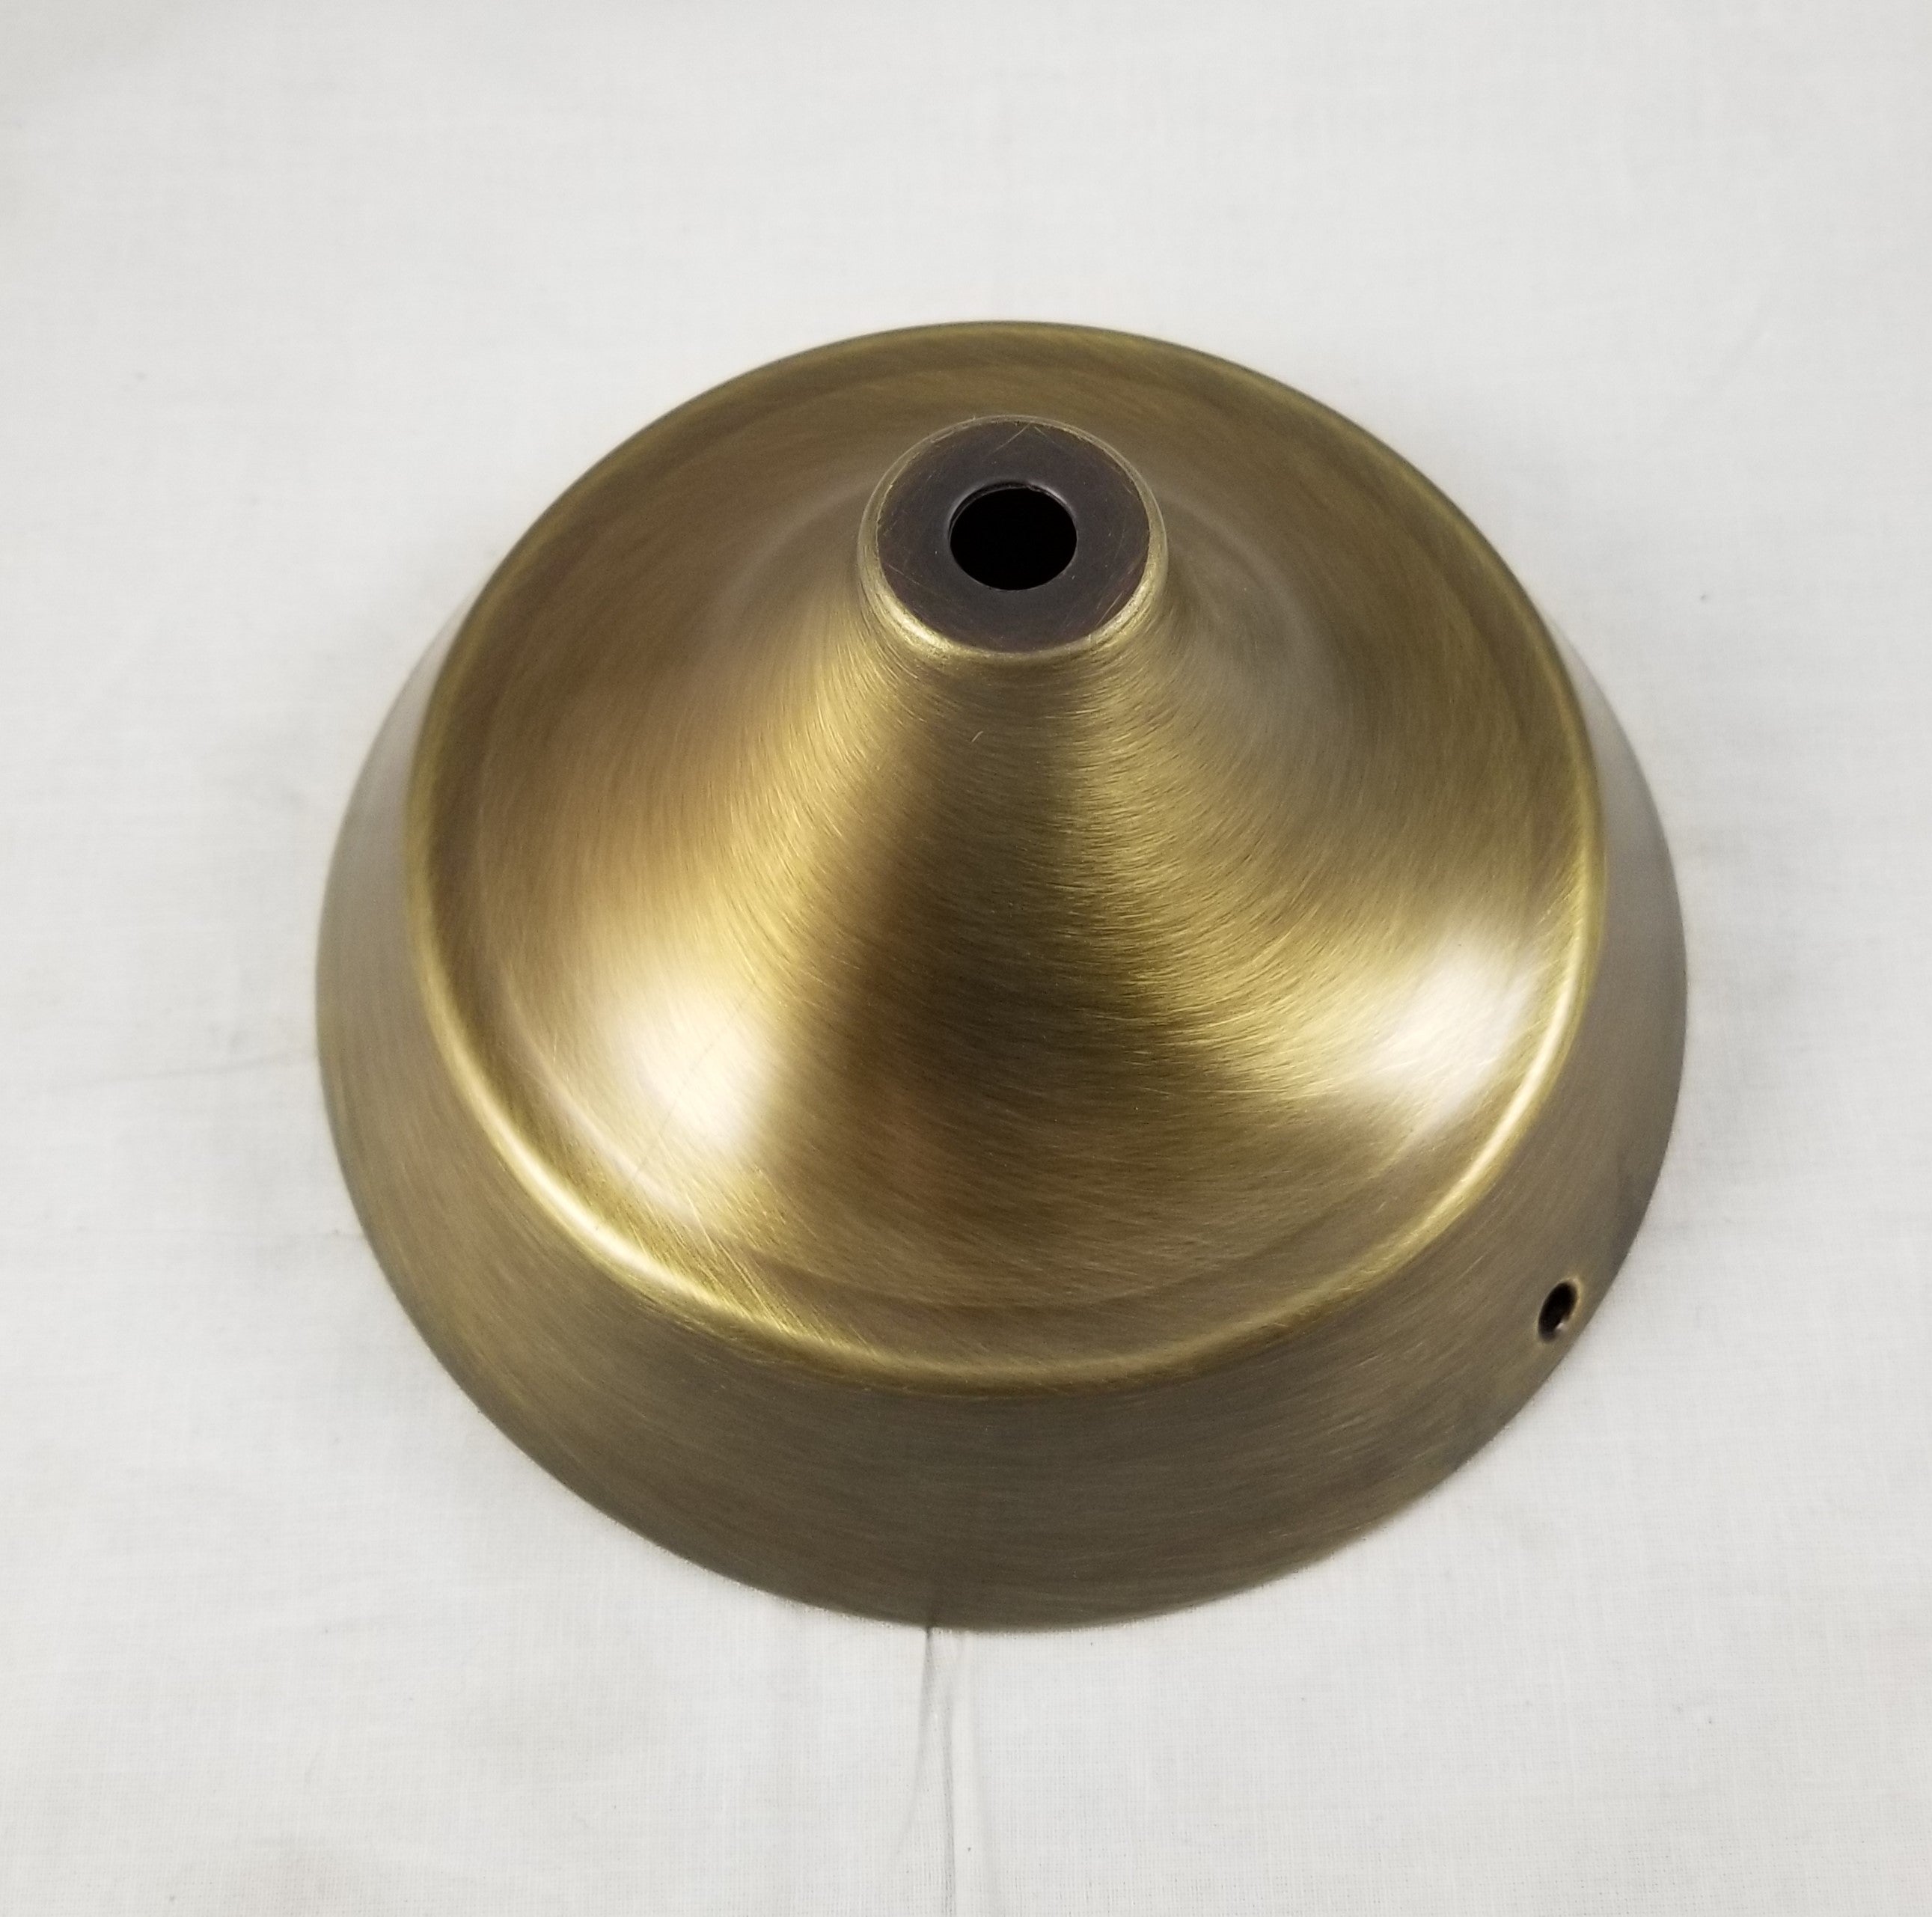 7" Antique Brass Plated Base